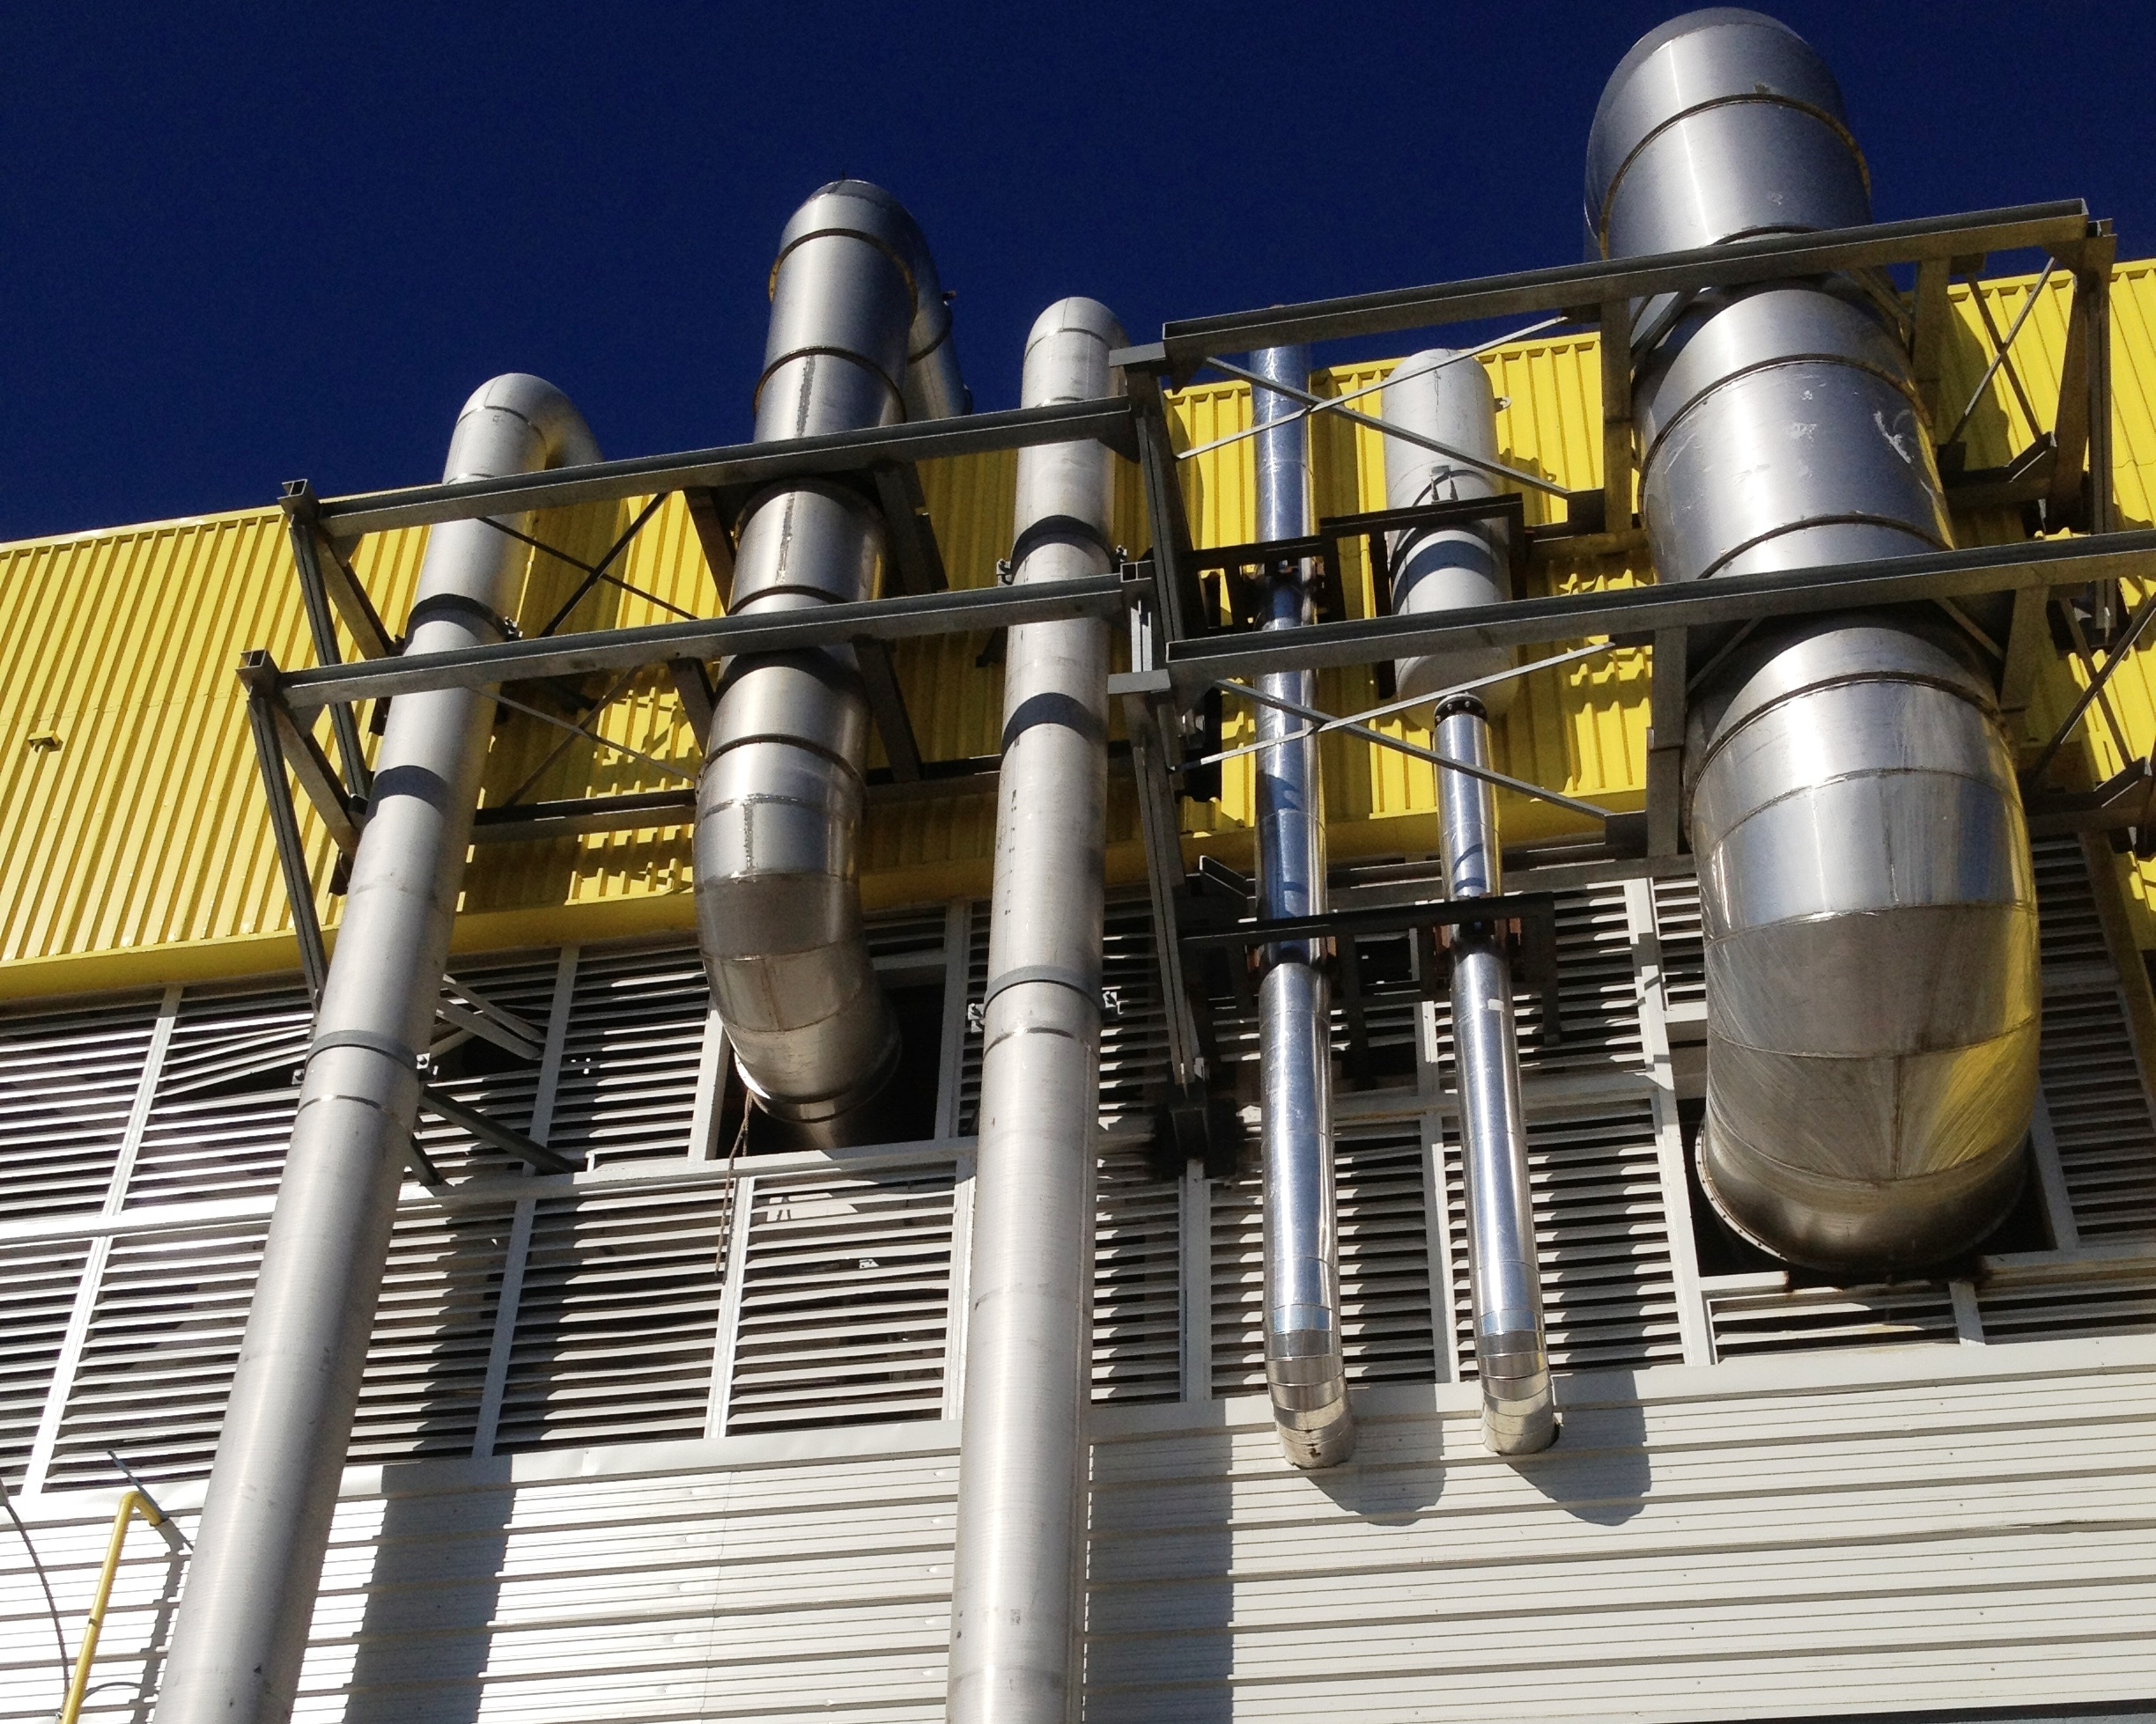 Stainless steel ducts